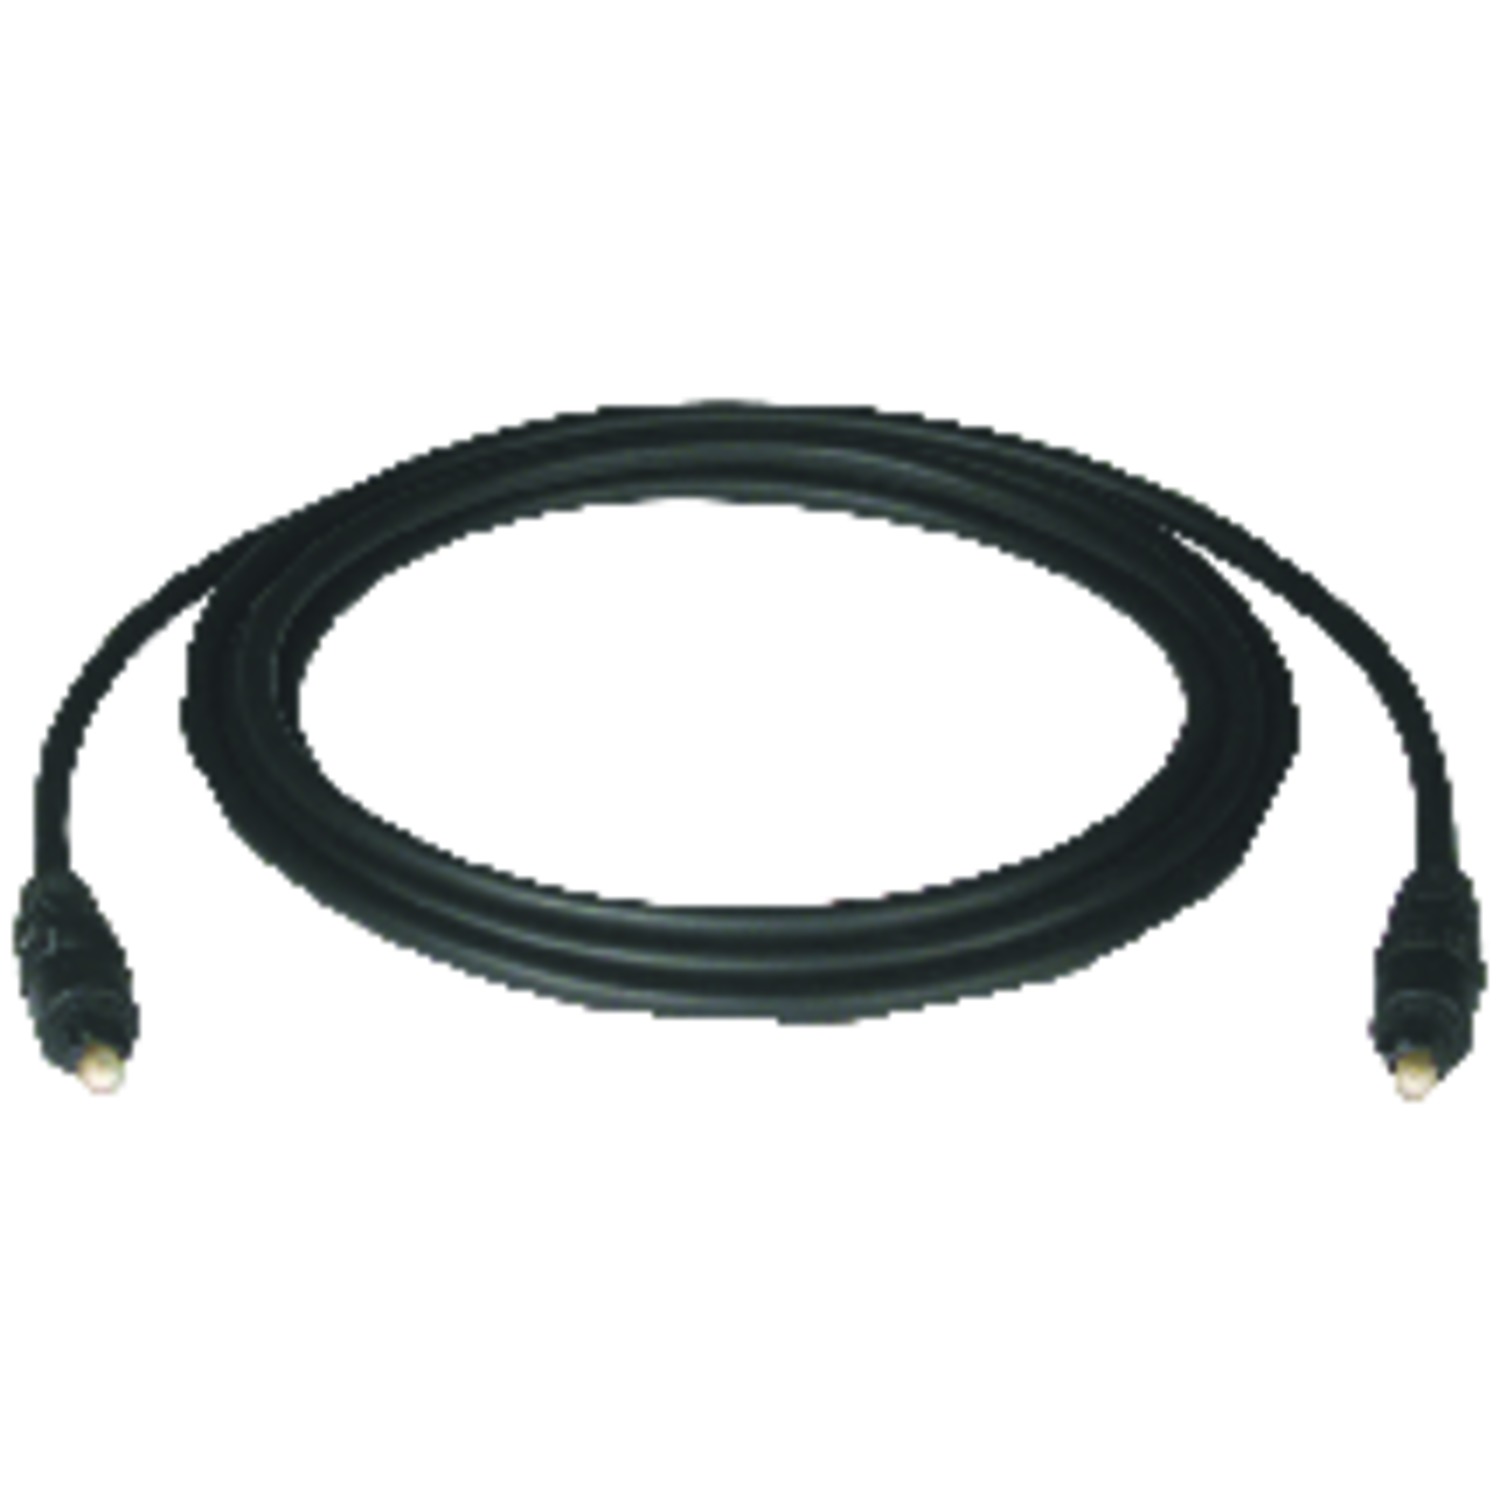 Tripp Lite A102-04m Tosl digitl Optical Spdif Audio Cable (13ft) - image 2 of 4